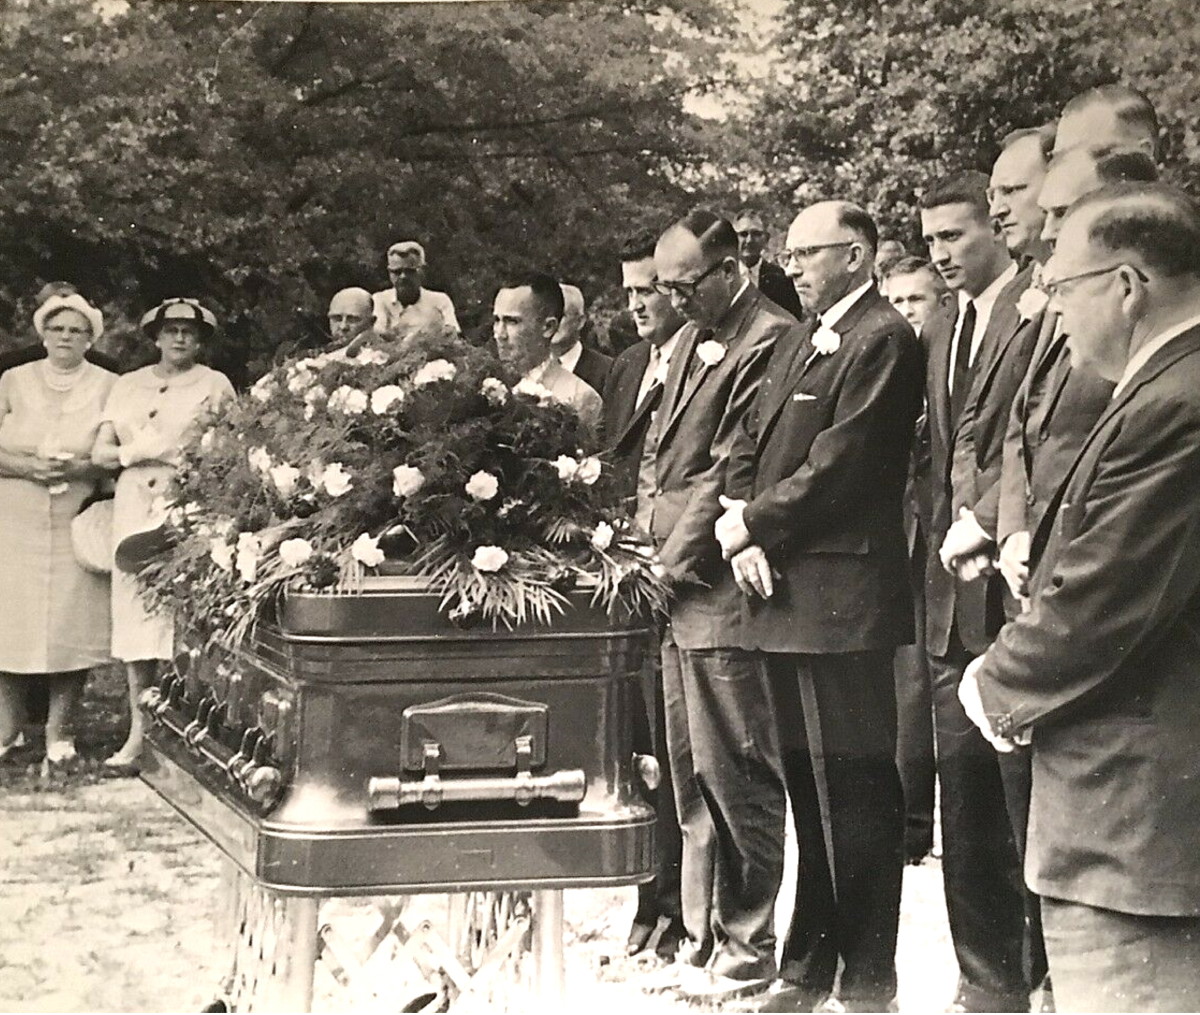 Photo of Ty Cobb’s casket taken at his July 19, 1961 funeral in Royston, Ga. His young personal assistant, medical student Rex Teeslink, who was asked by Ty to serve as a pallbearer, is fifth from the right.